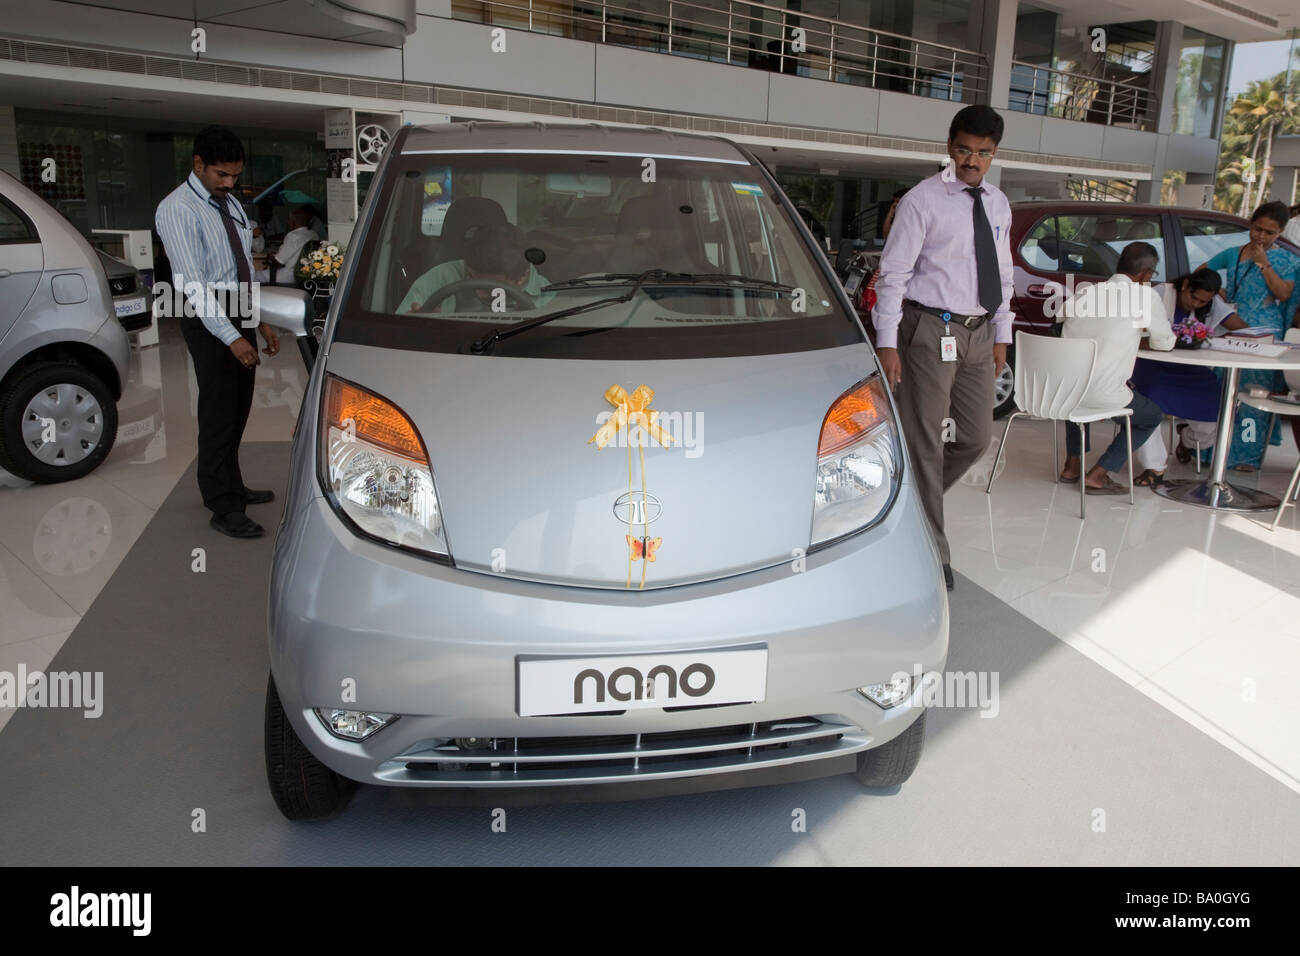 the new Tata car the Nano has been release in the shop of india and indian people seems to be really interresting by this low cost car 2000 Euros than will come soon on the western market Stock Photo